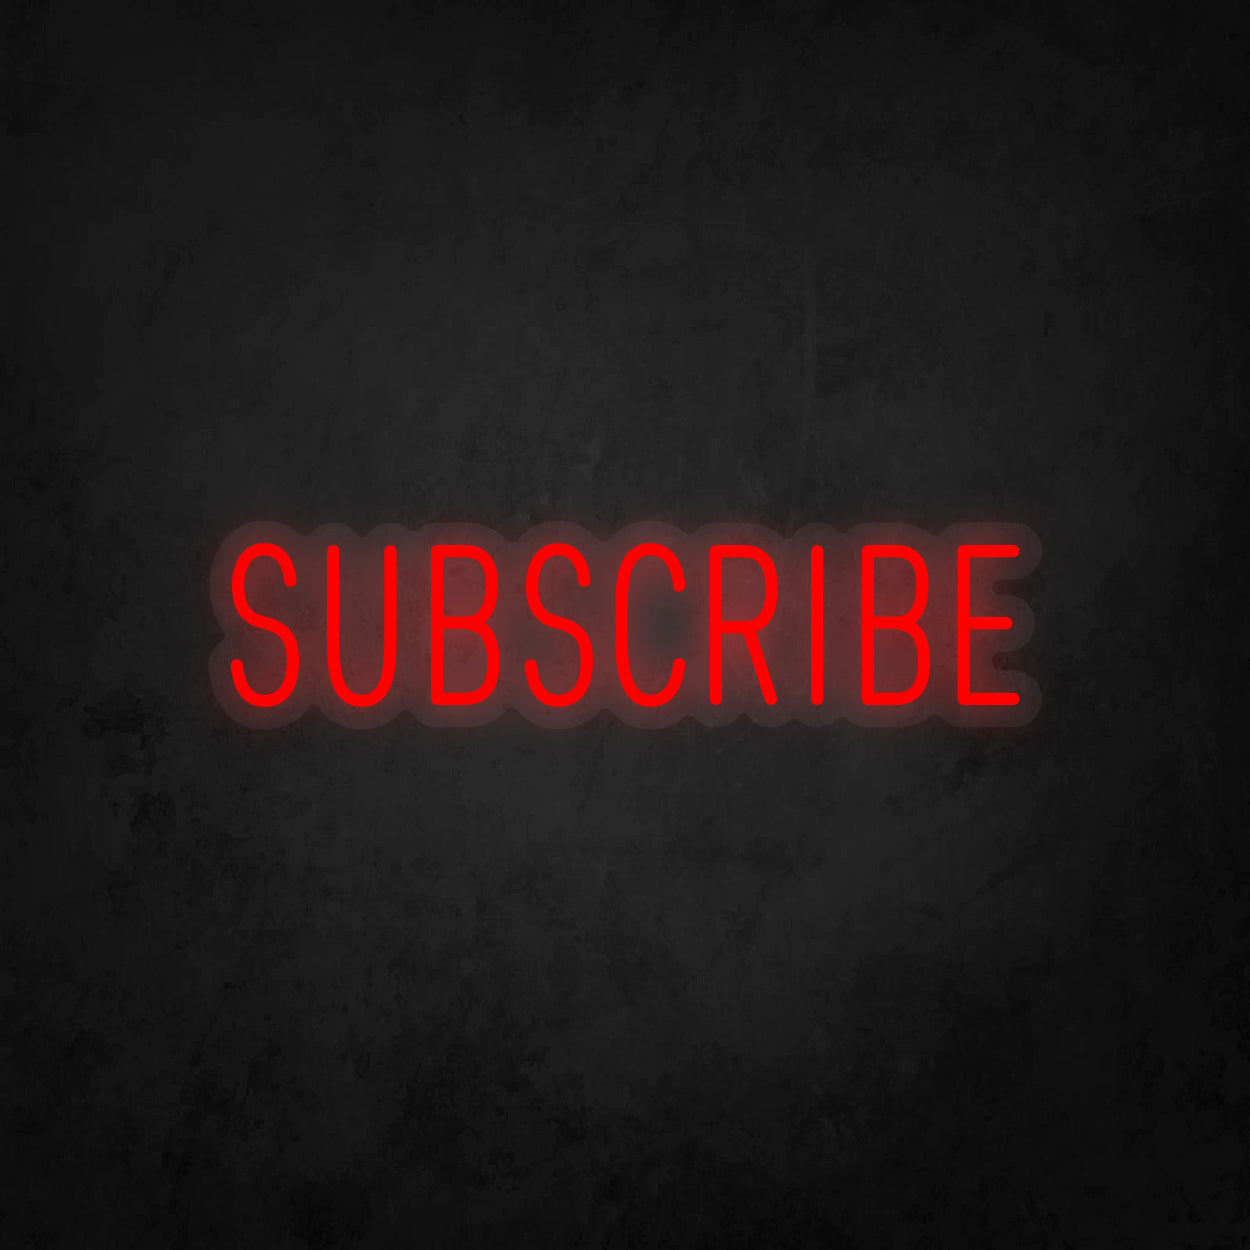 LED Neon Sign - Subscribe